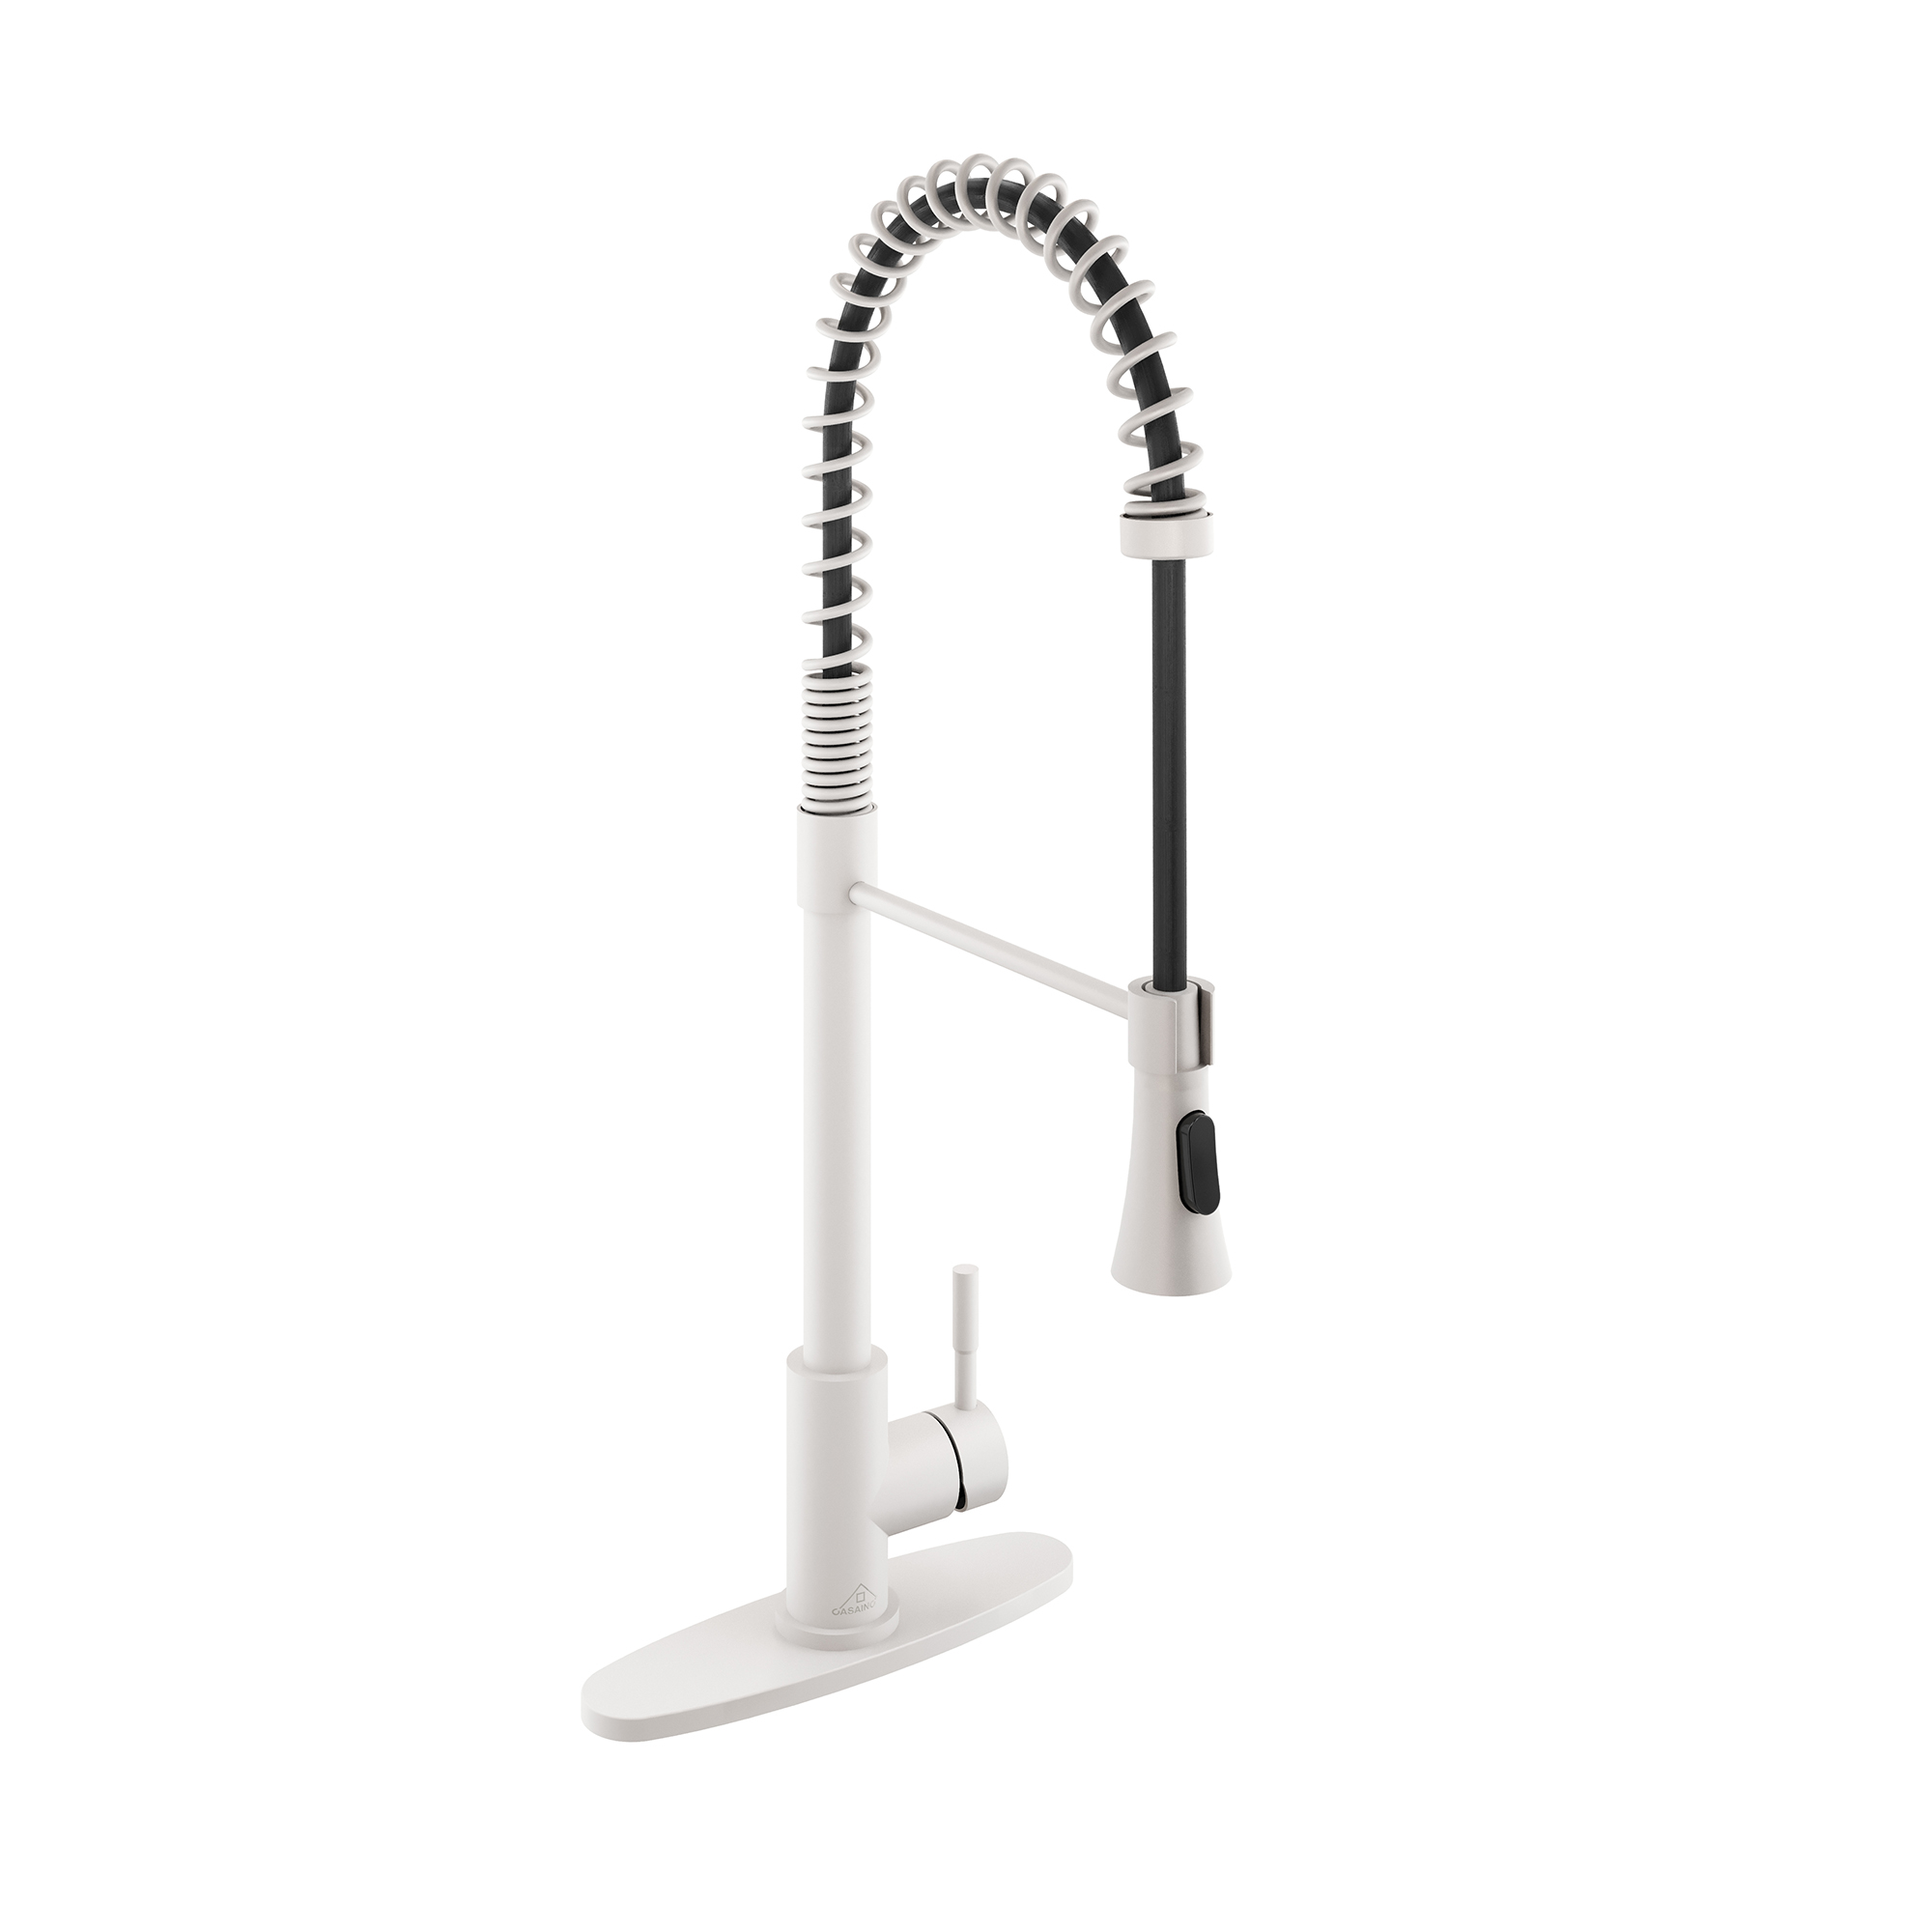 CASAINC 1.8GPM Modern Spring Pull Down Sprayer Kitchen Faucet with Dual-Function Spray Head and Deck Plate, in Brushed Nickel and More